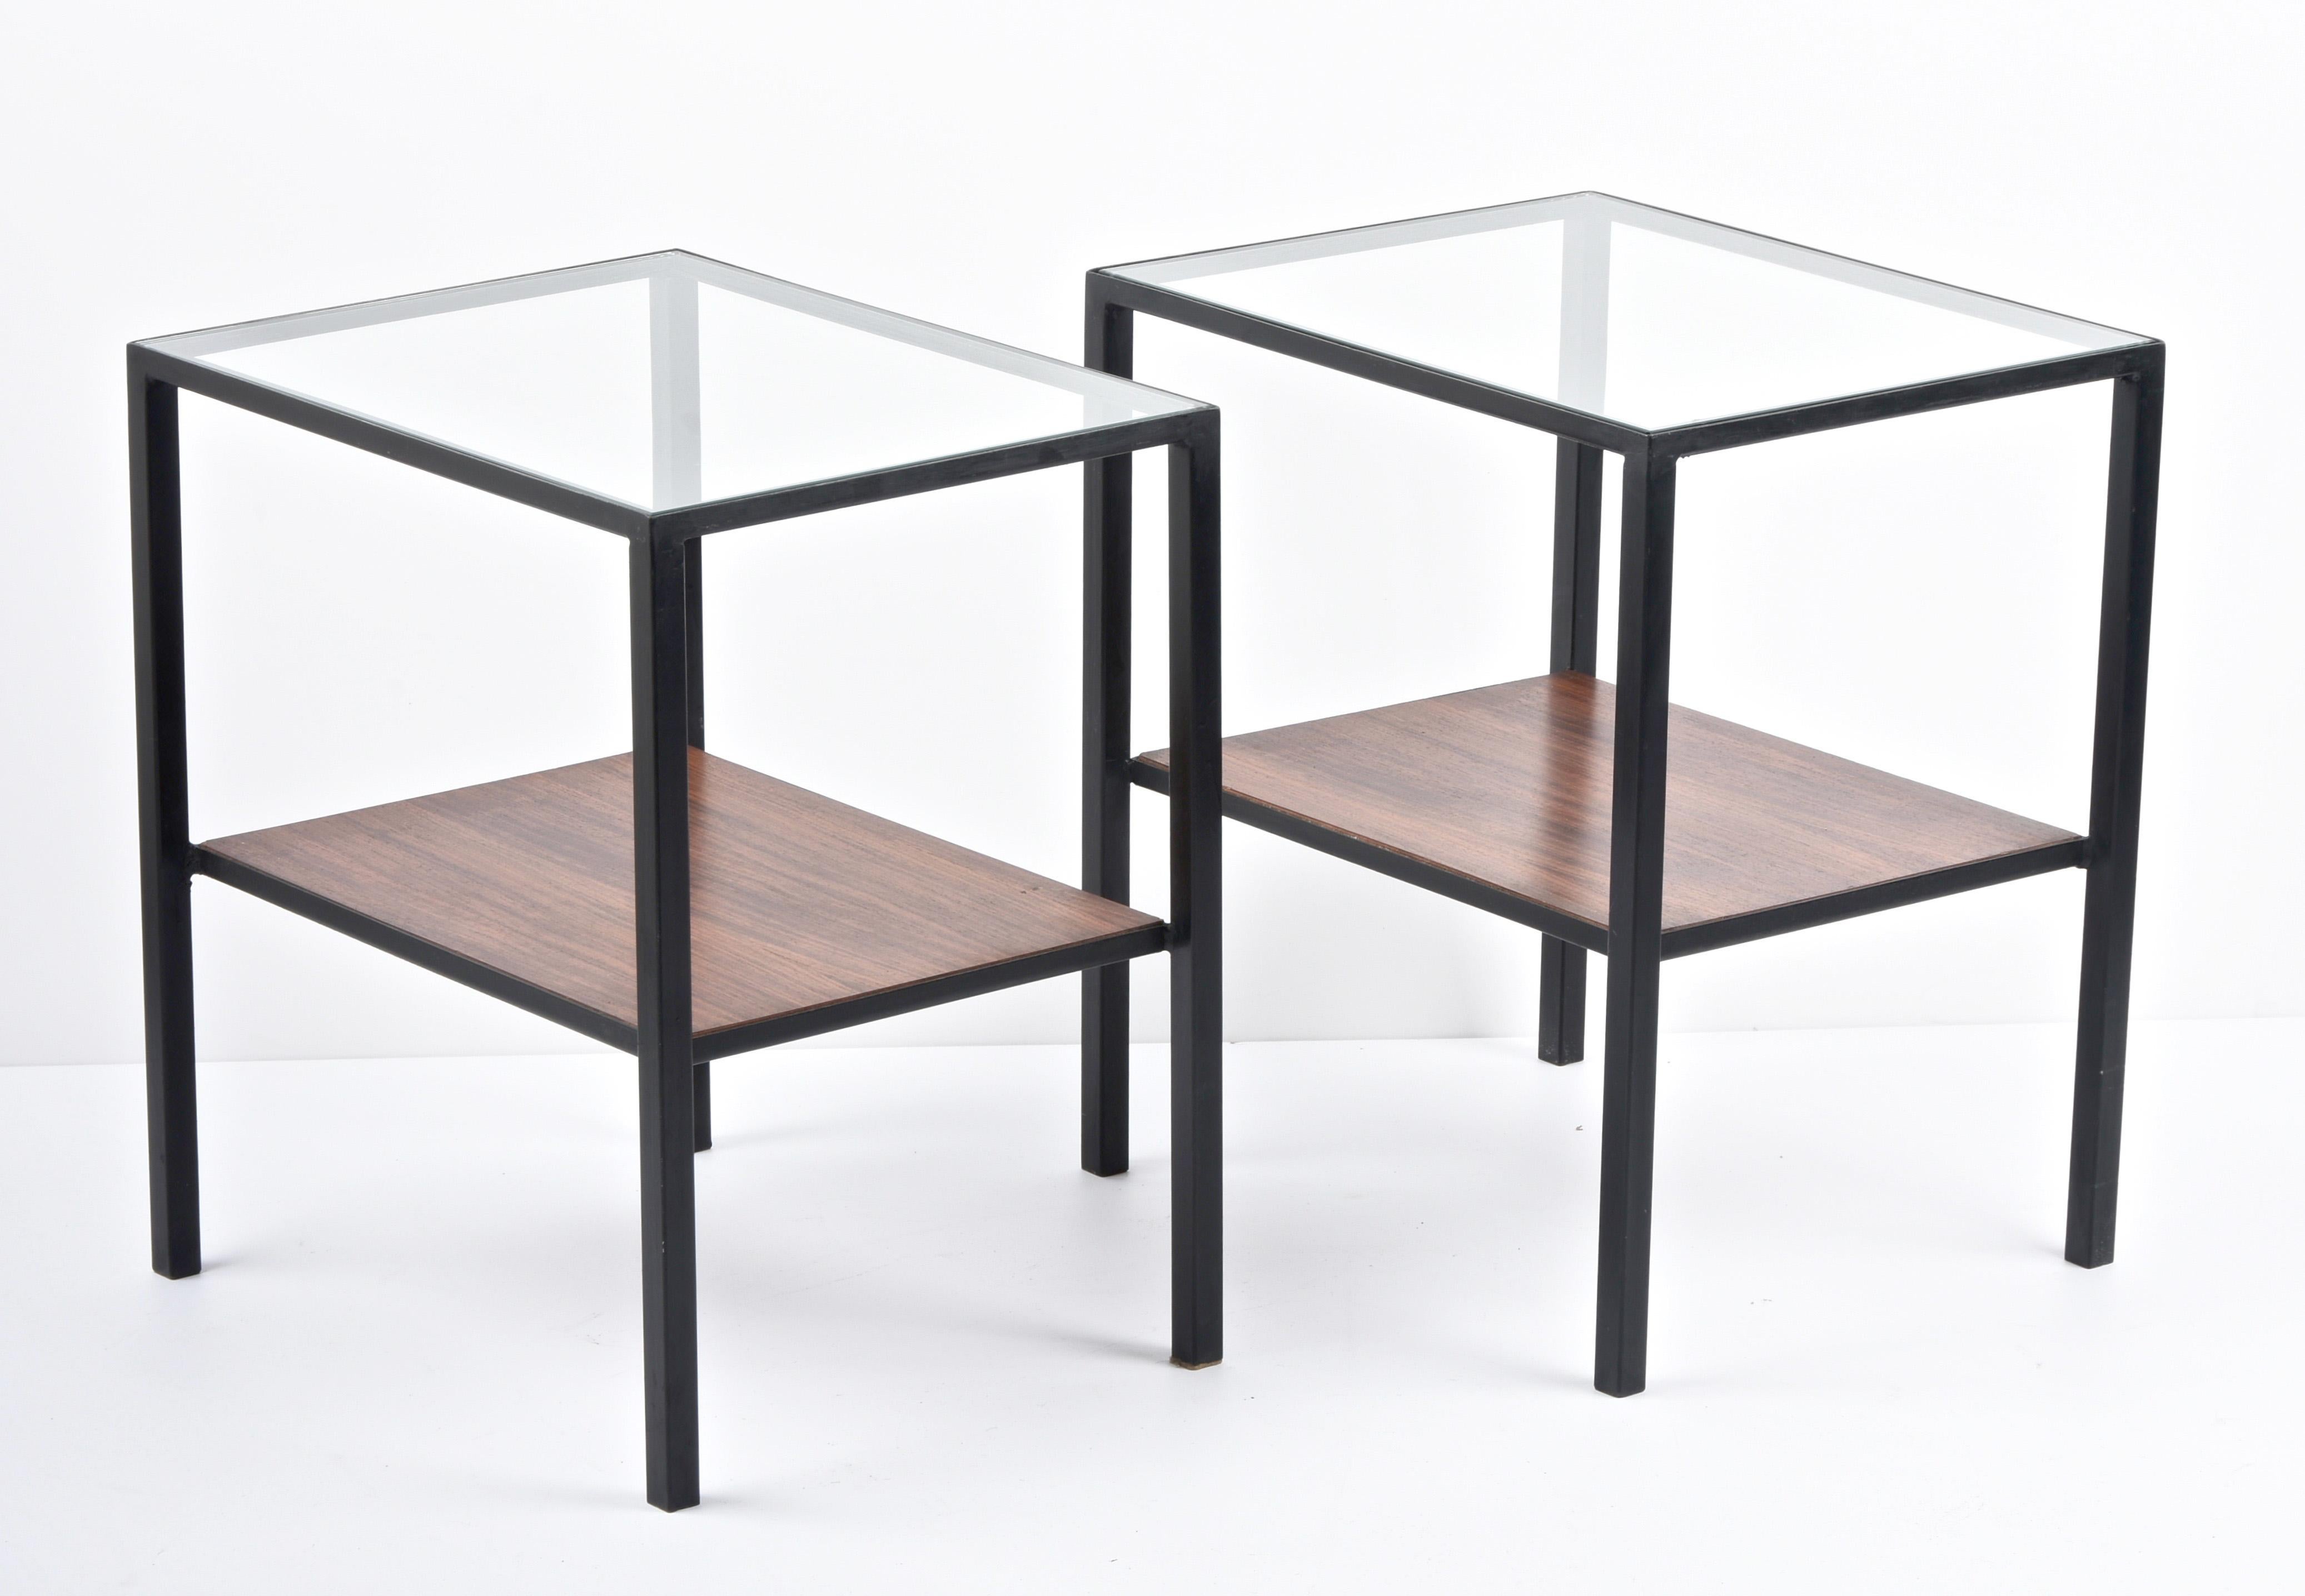 20th Century Pair of Iron, Glass and Wood Italian Coffee Table with Two Shelves, 1960s For Sale